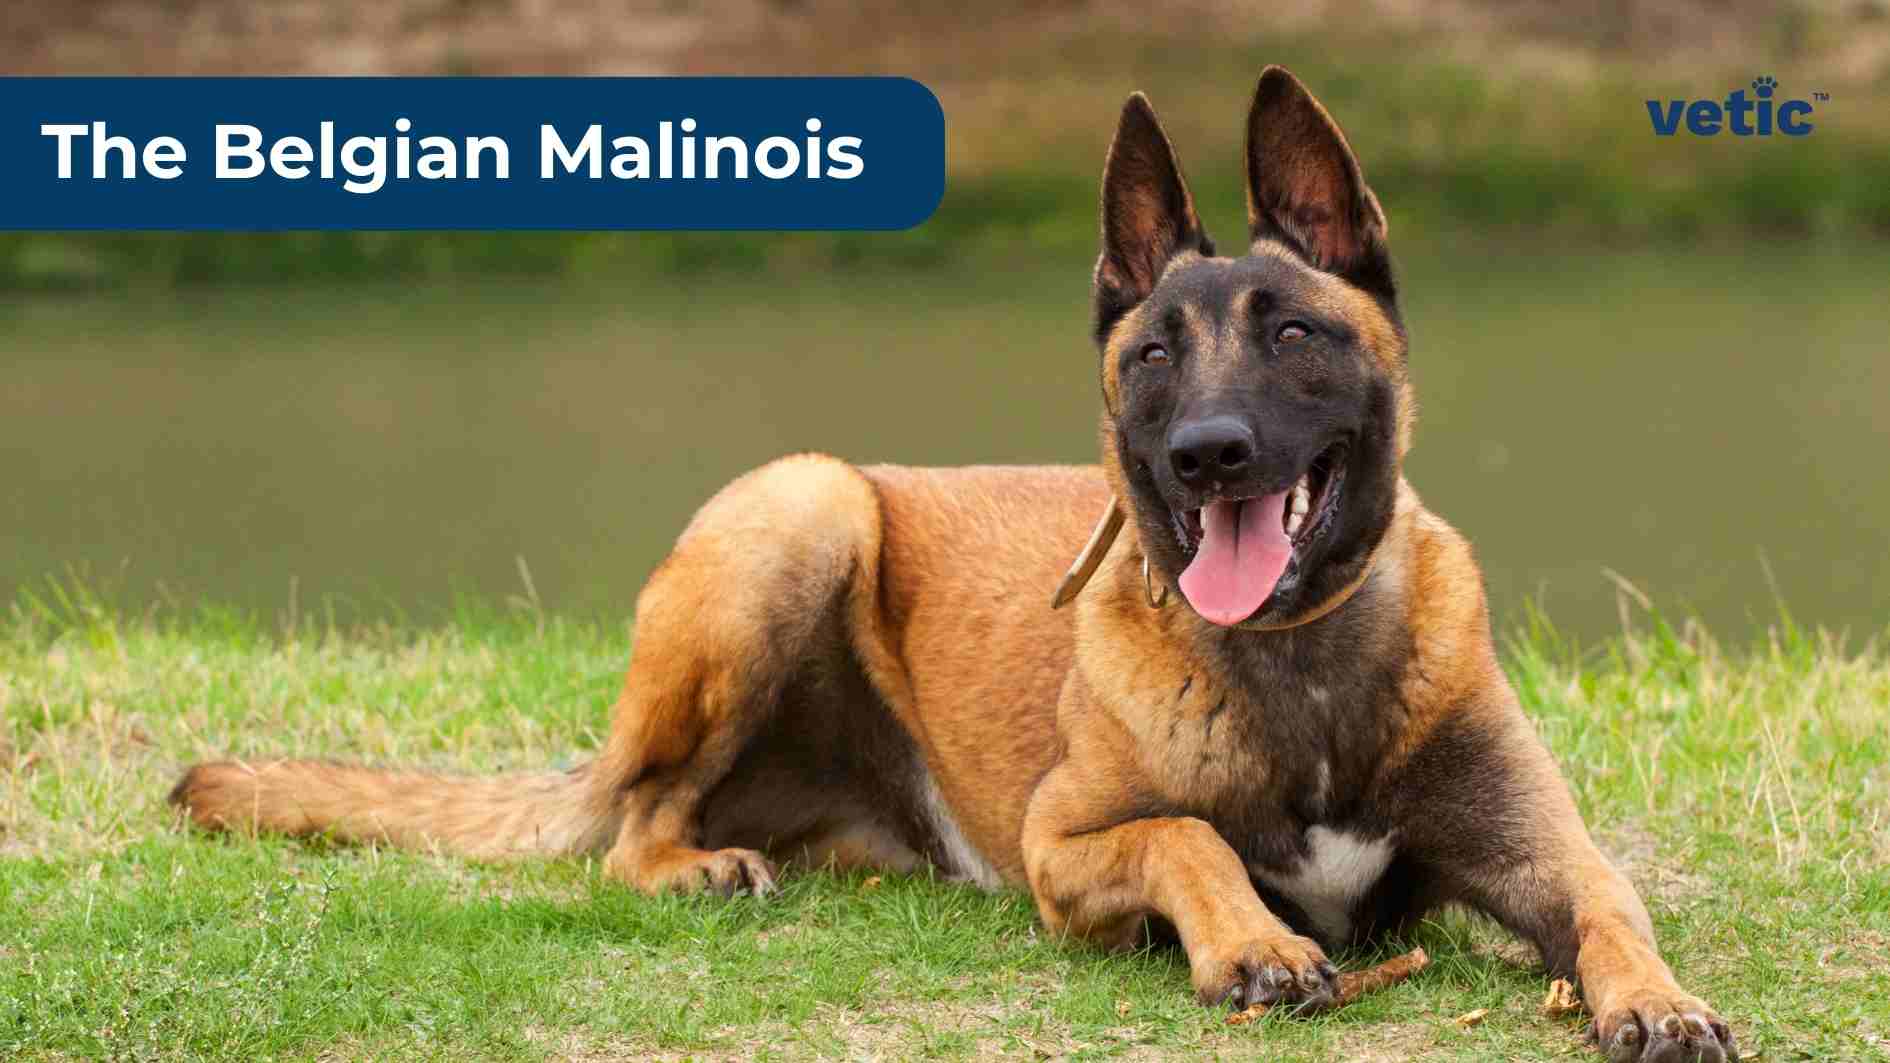 The Belgian Malinois - rusty brown coat with a black mask, pointed ears. short coat wearing a brown collar.